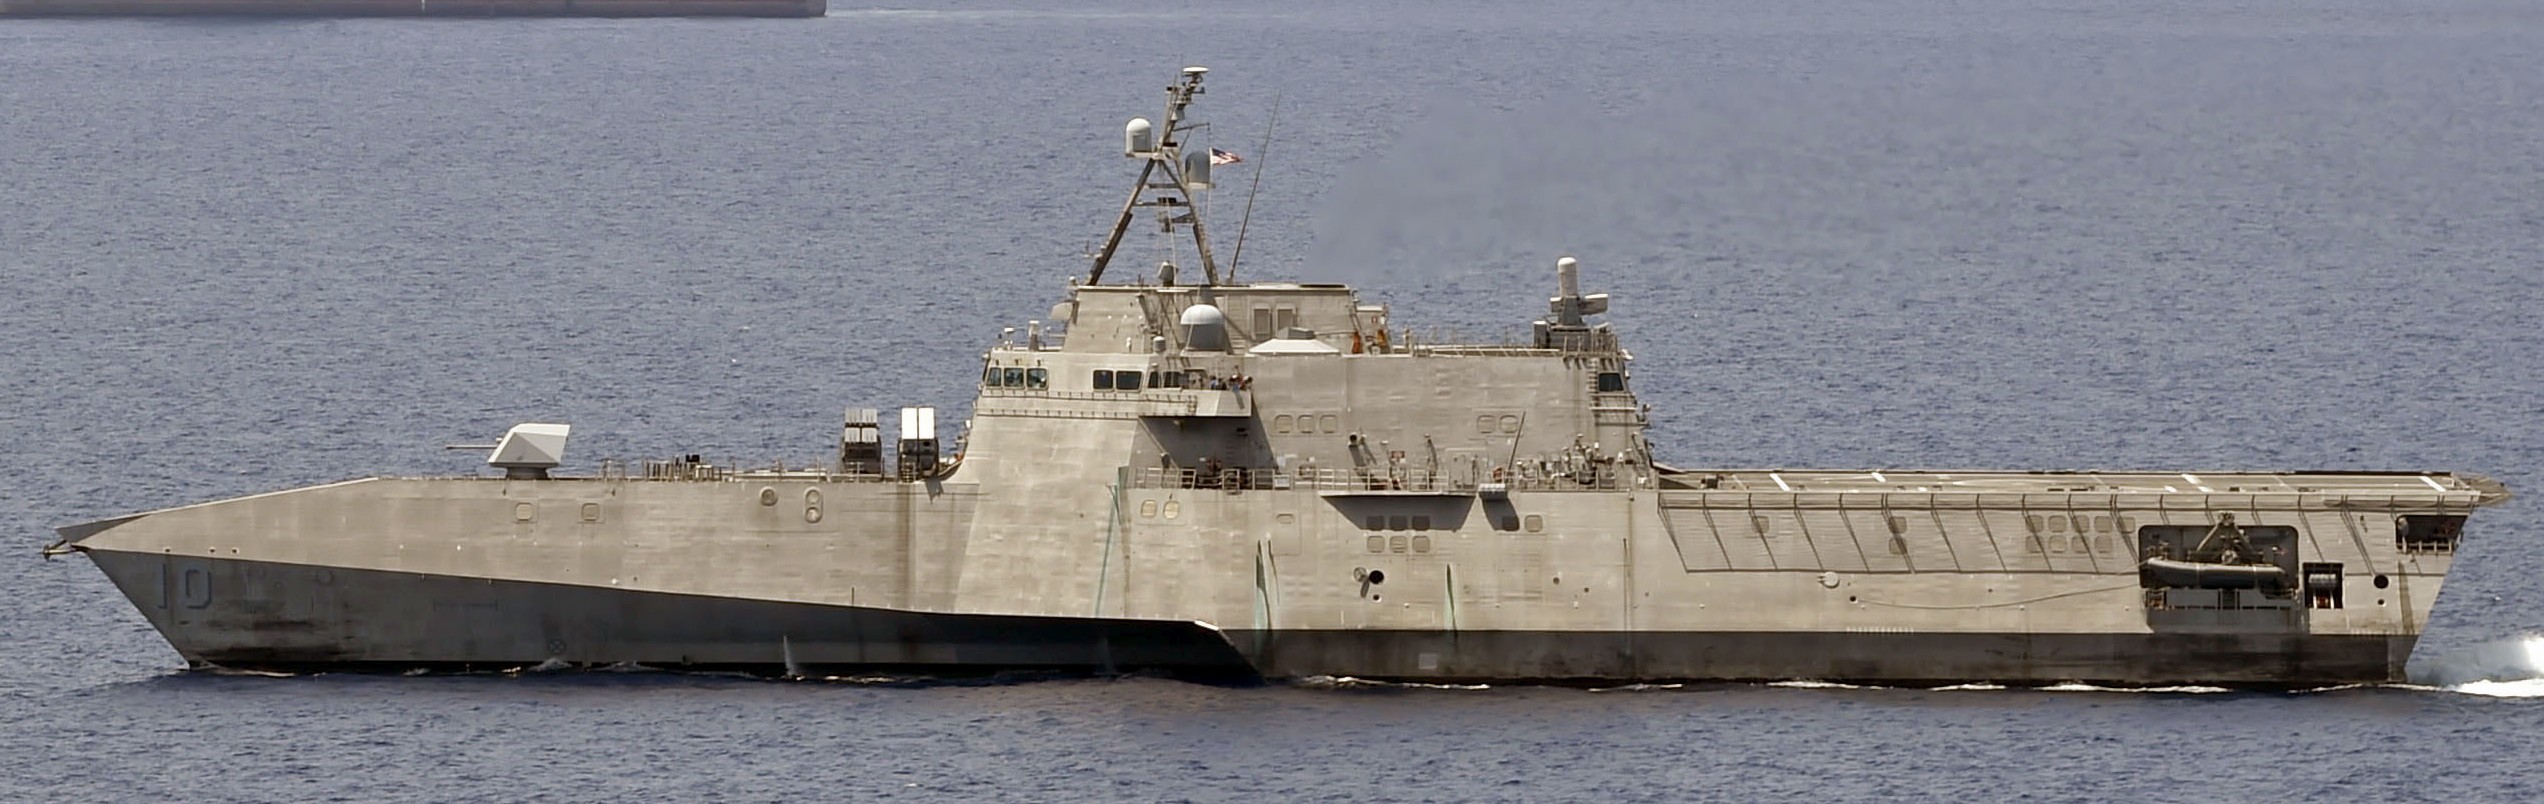 lcs-10 uss gabrielle giffords littoral combat ship independence class us navy 34